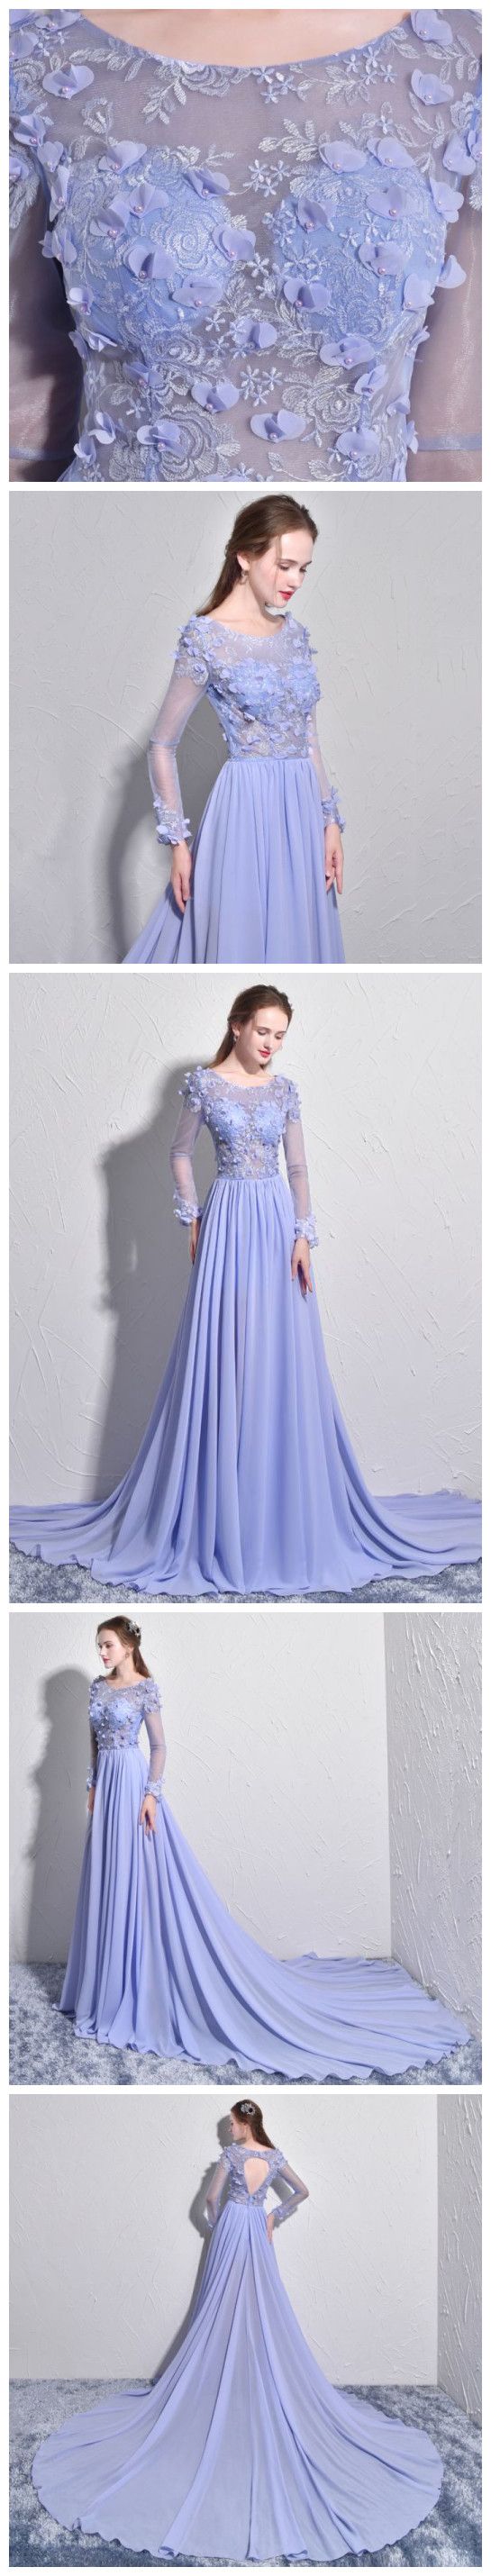 Chiffon See through Floral Lace Top Long Sleeve Lilac Prom Dress Formal Dress with Long Sleeves #21011201-Dolly Gown